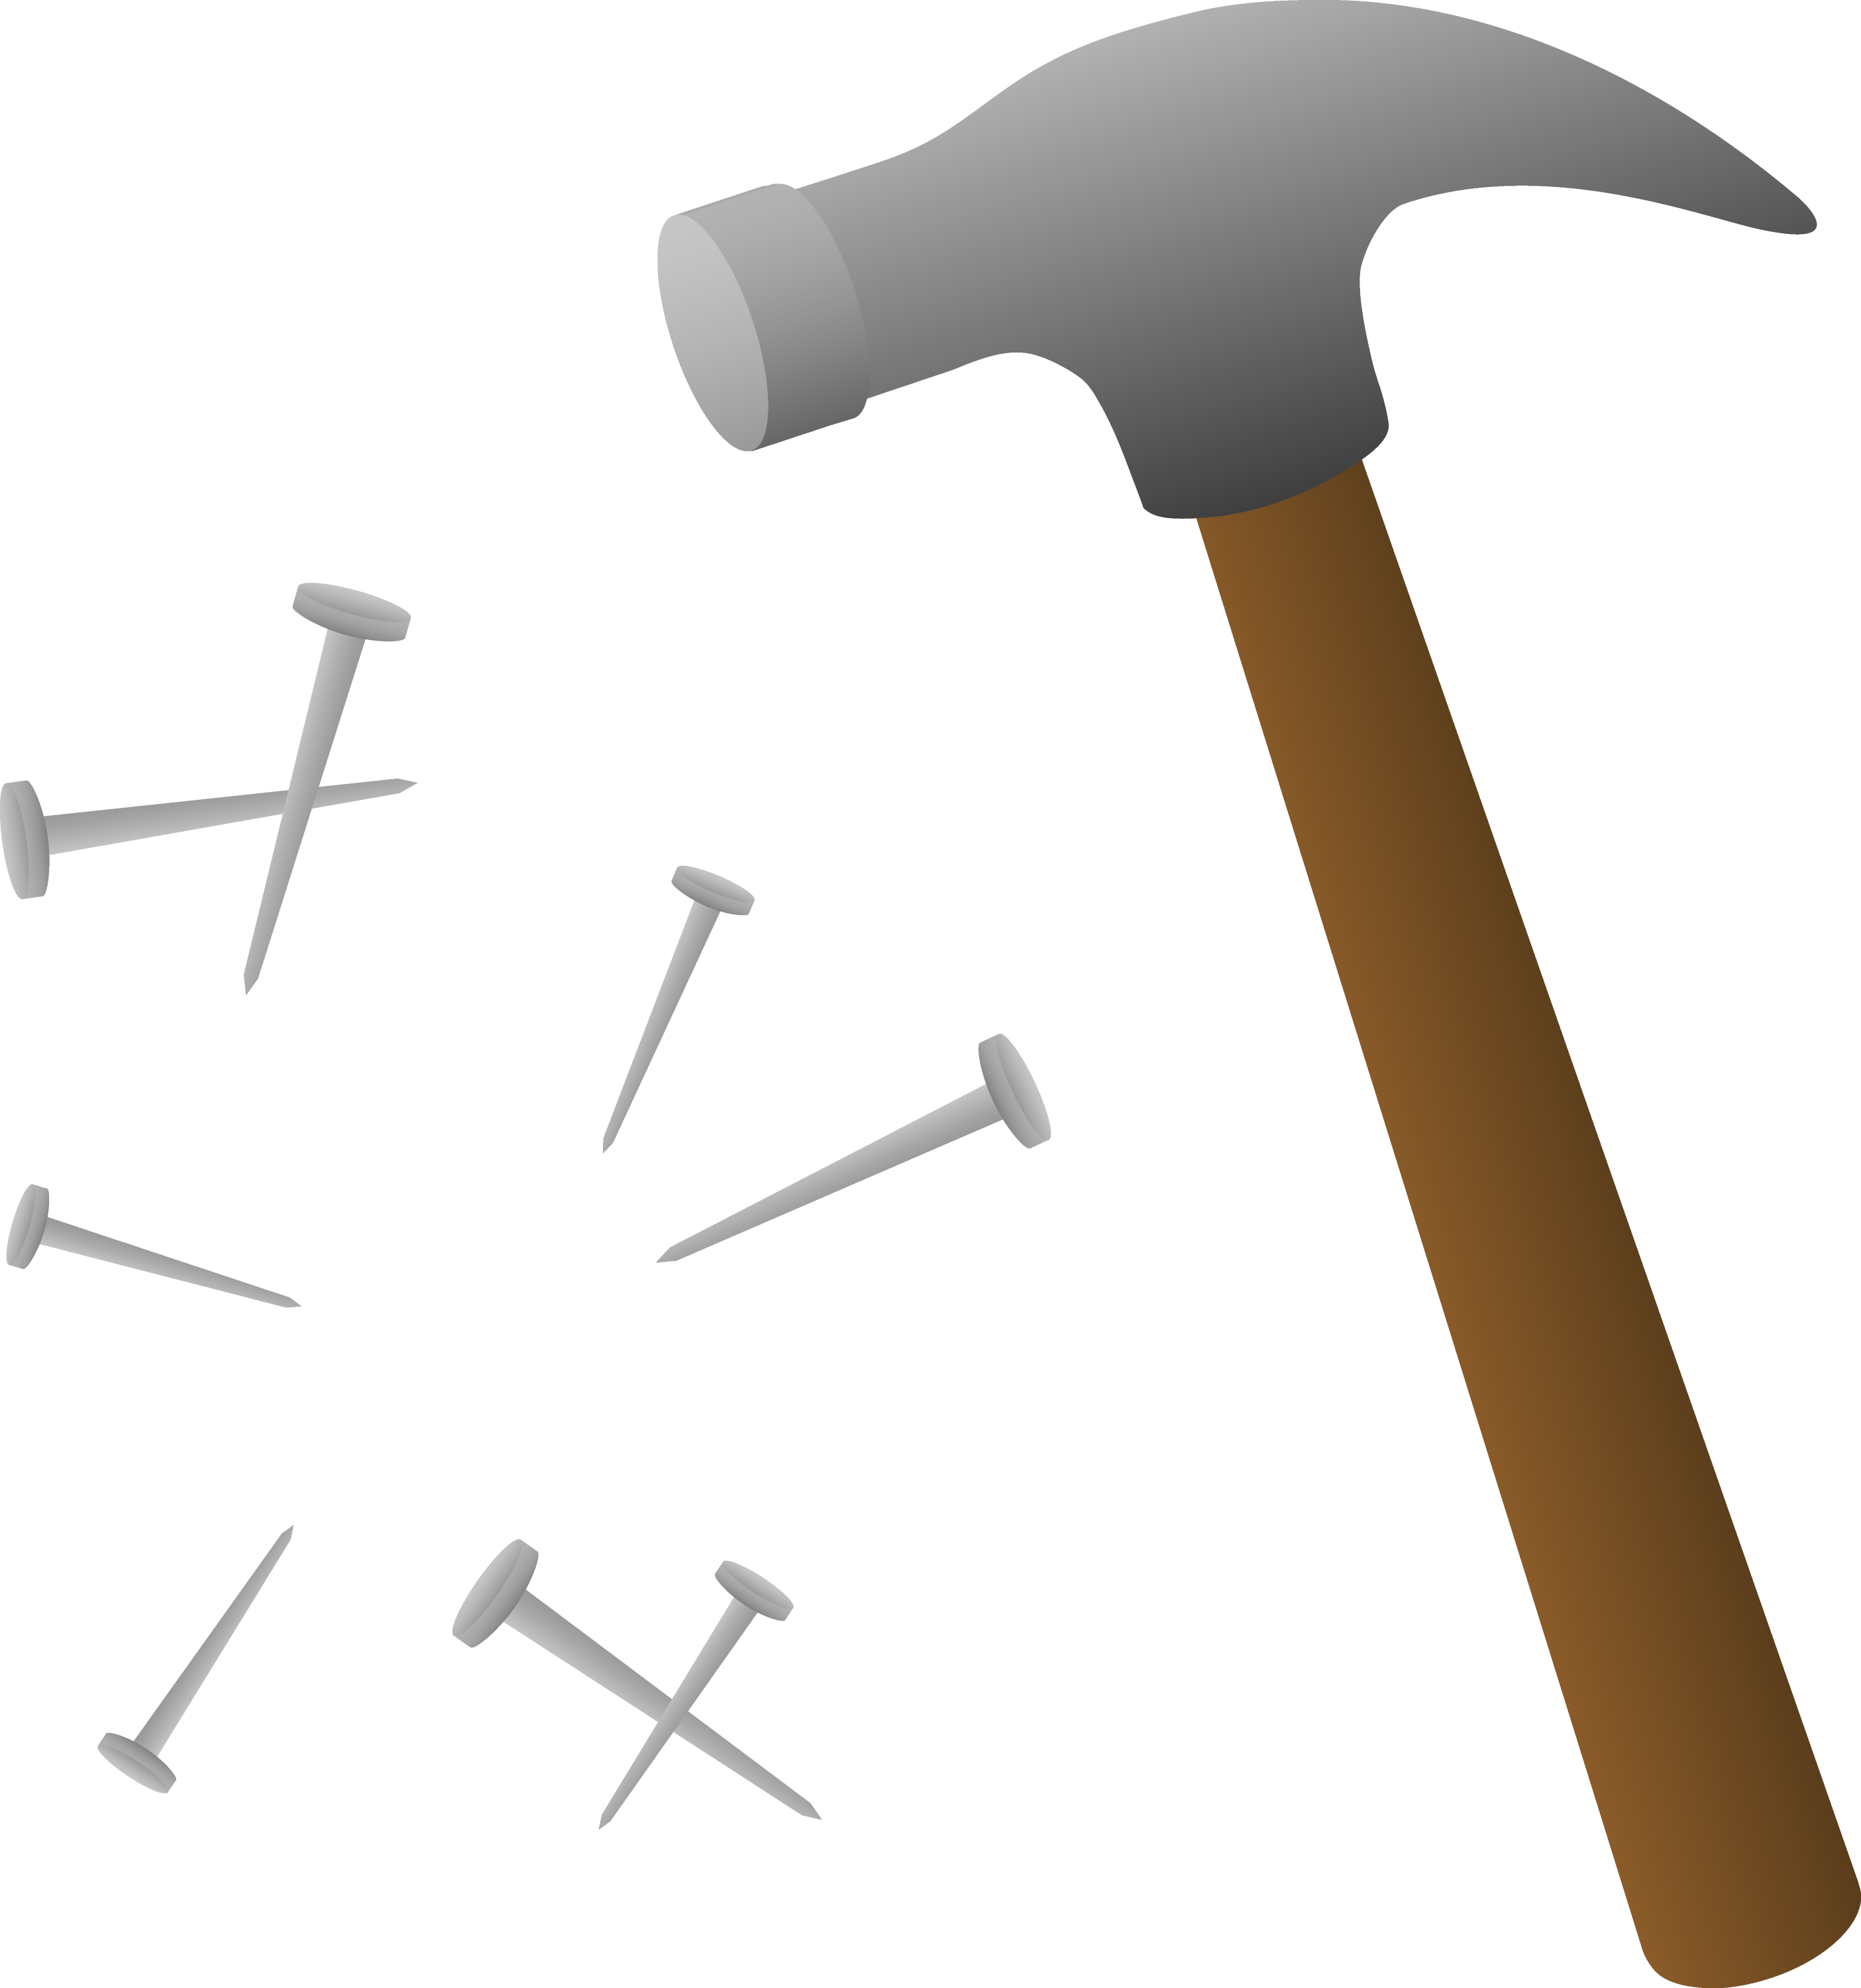 clipart of hammer - photo #26